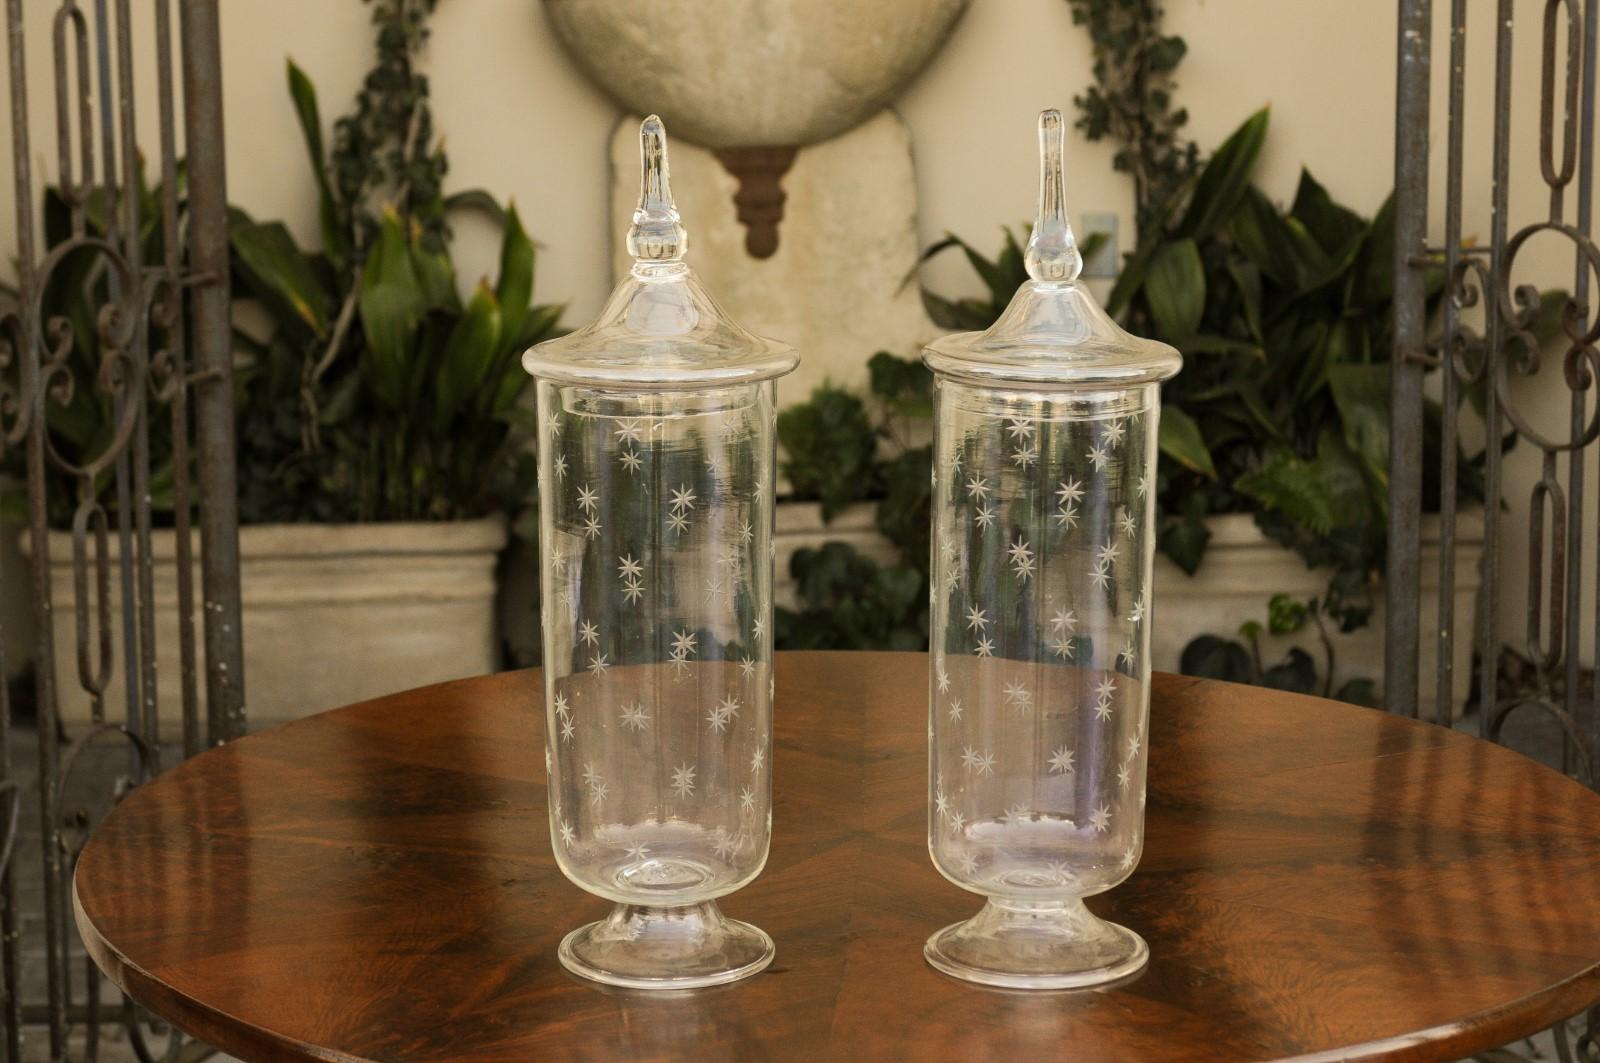 A pair of English Edwardian period tall glass lidded jars from the early 20th century, with circular bases and star motifs. Born in England during the reign of King Edward VII, each of this pair of stylish glass jars features a conic lid with tall